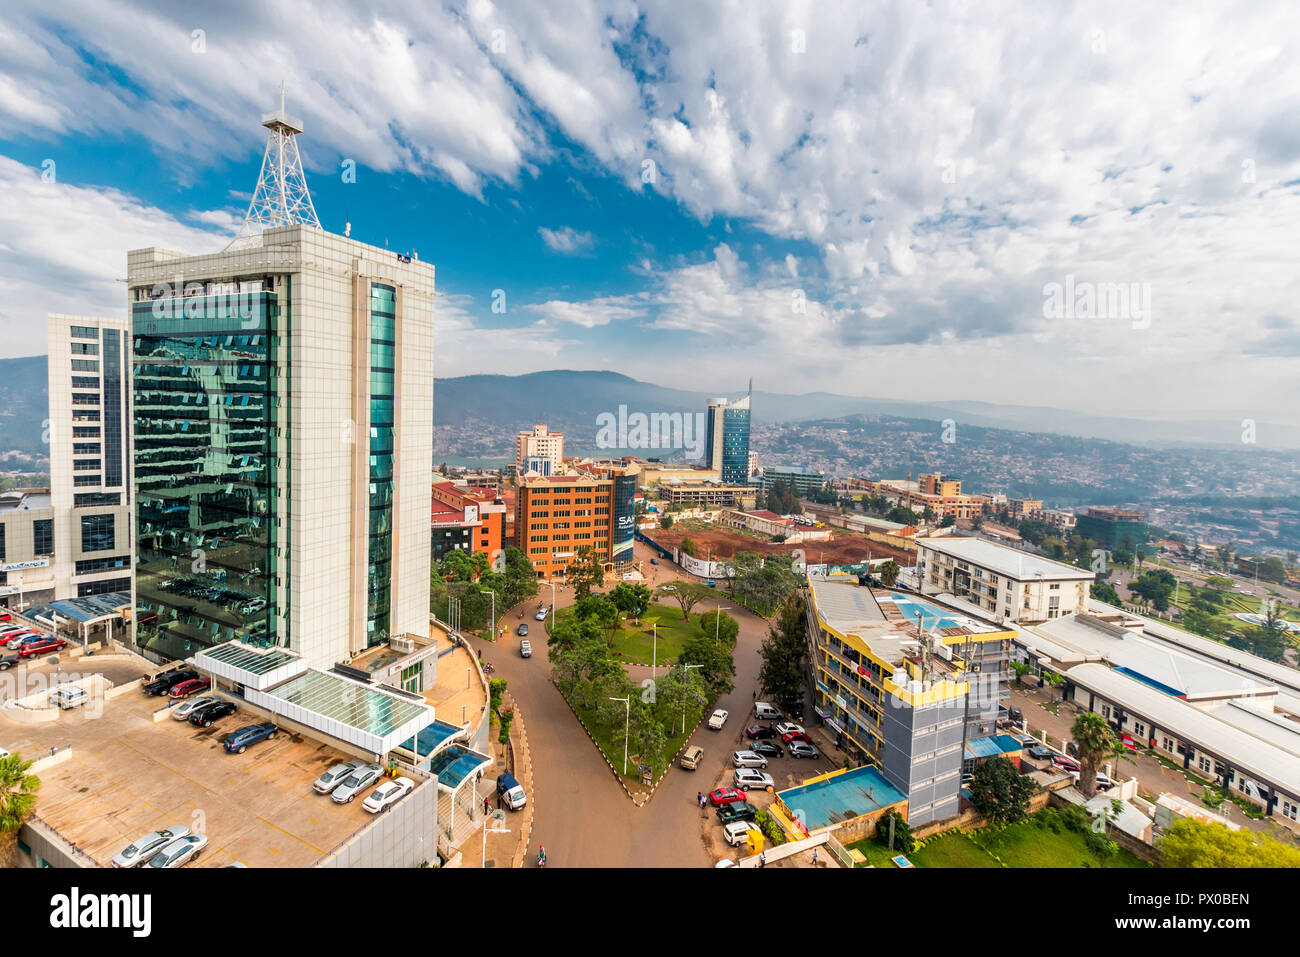 Kigali, Rwanda - September 21, 2018: a wide view looking down on the city centre with Pension Plaza looming in the foreground and Kigali City Tower in Stock Photo